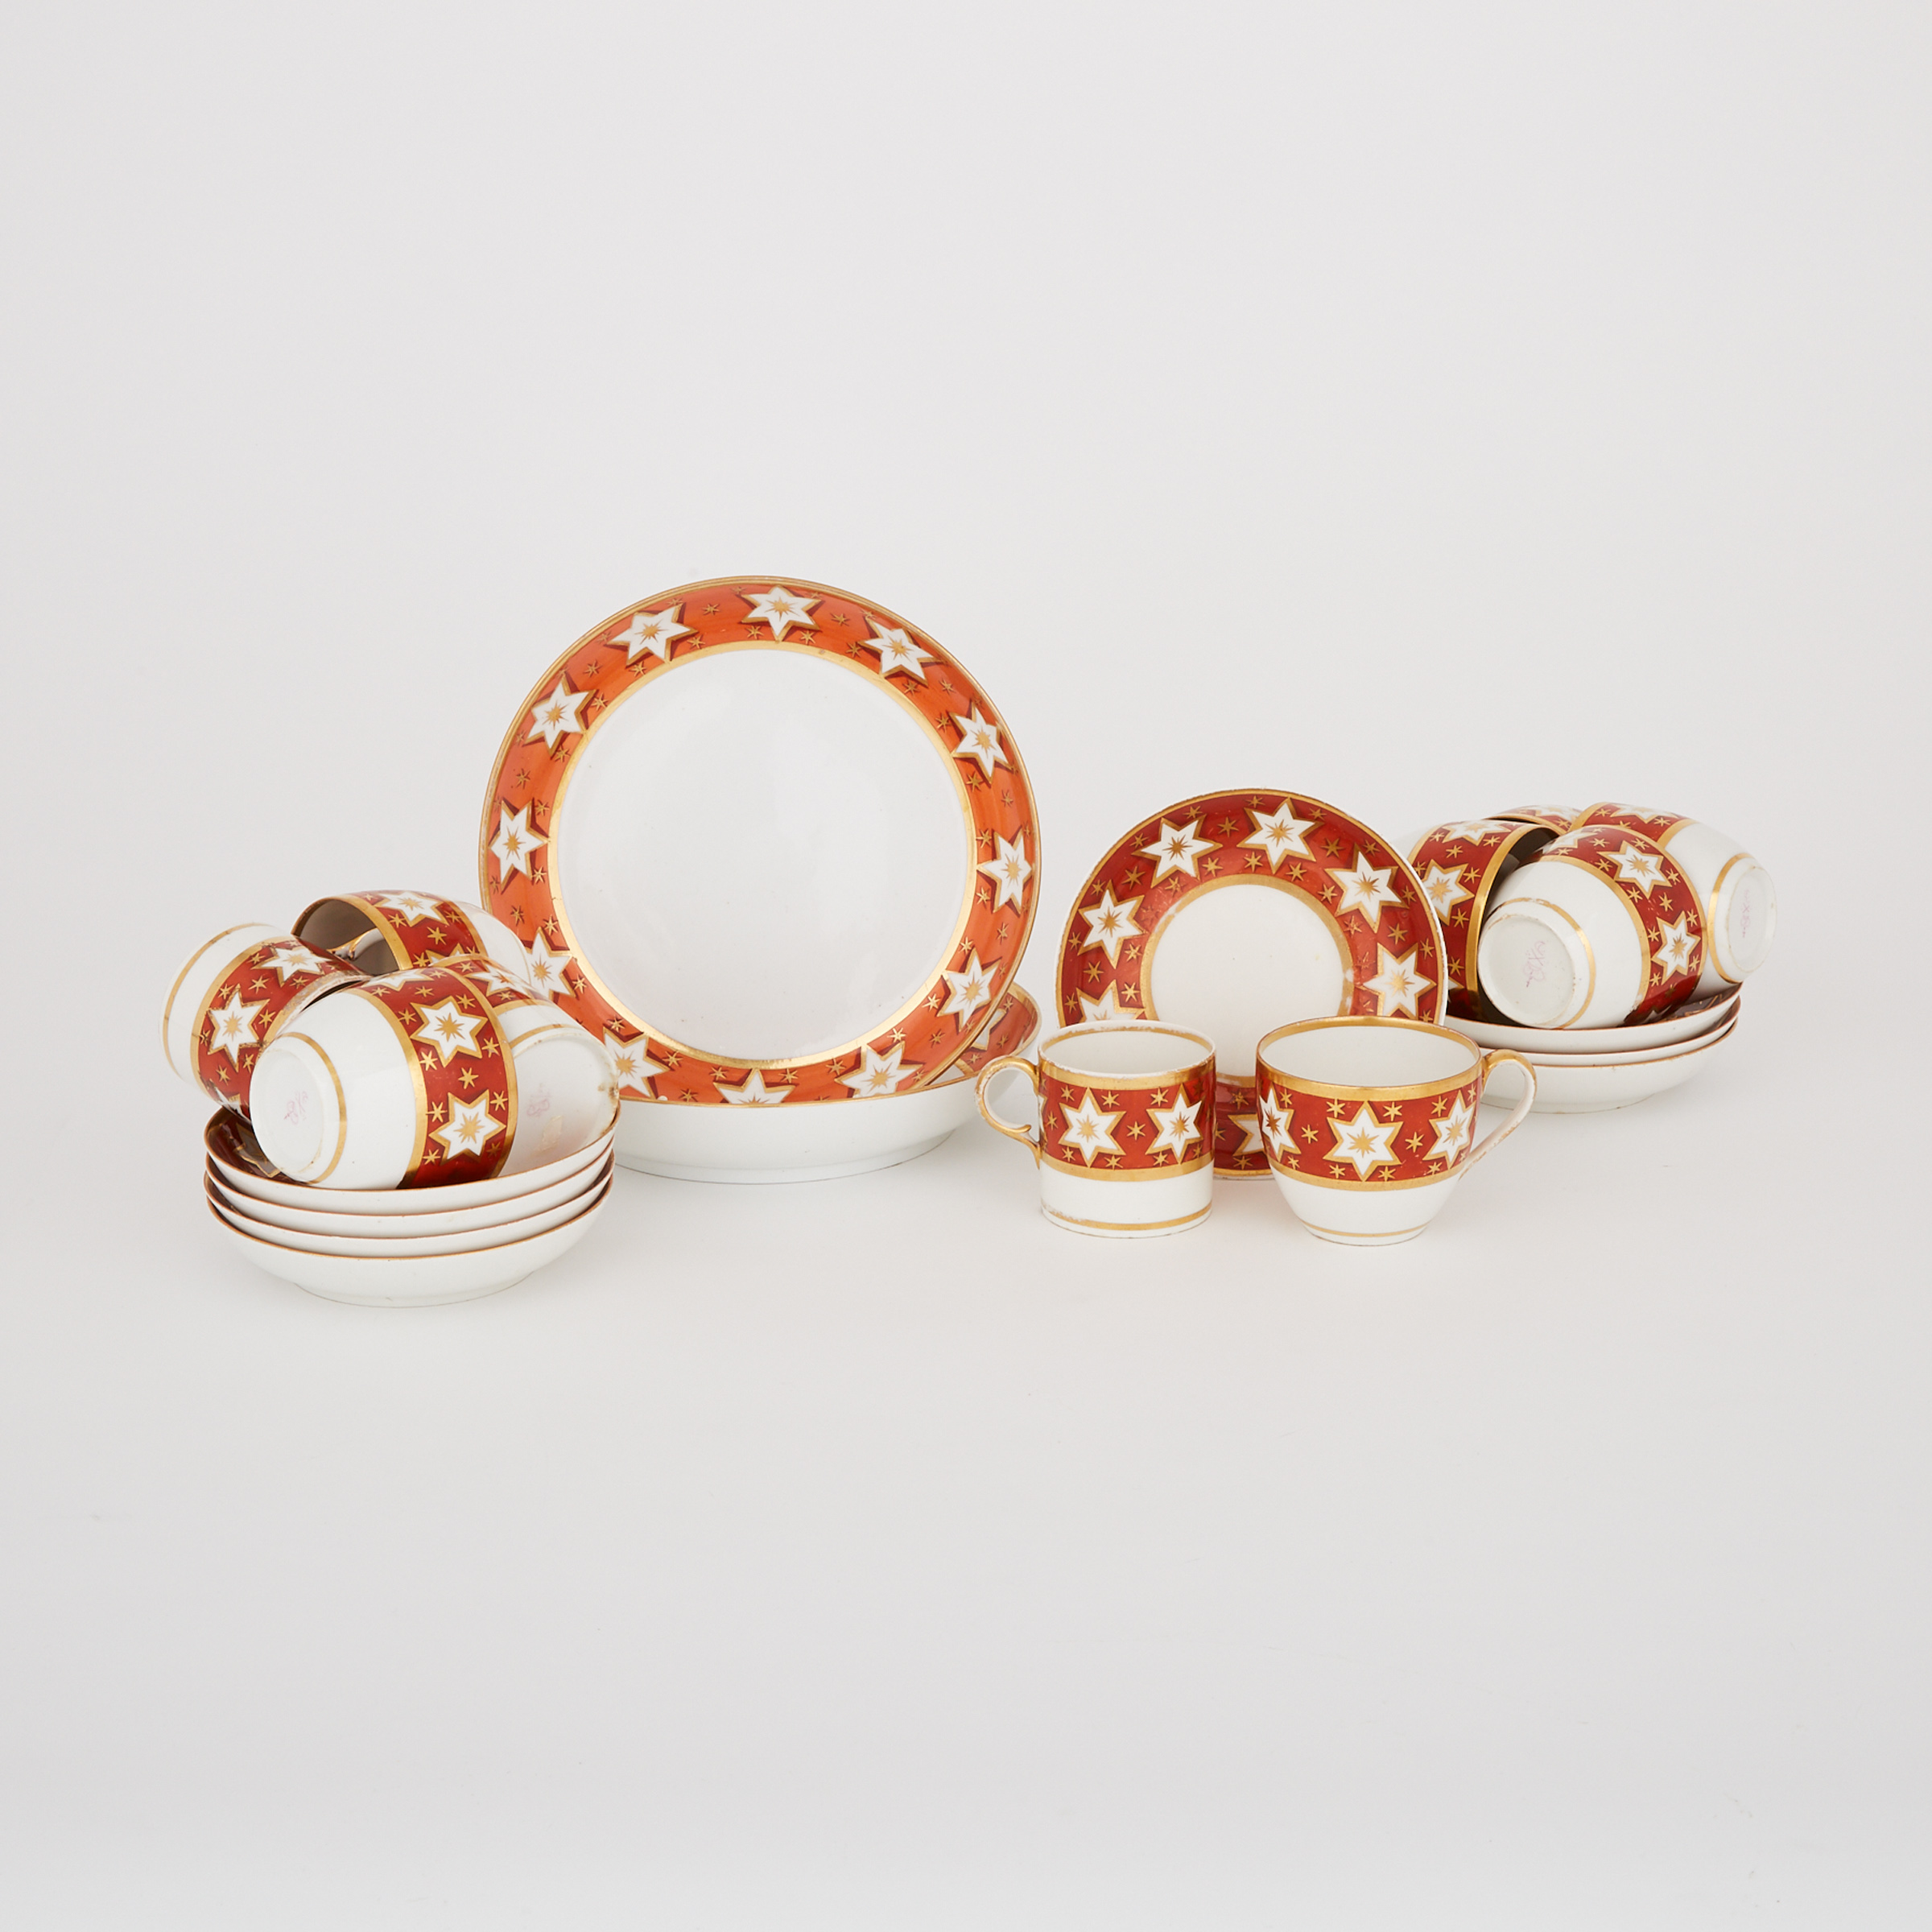 Group of Derby Orange and Gilt-Banded Teawares, 19th century